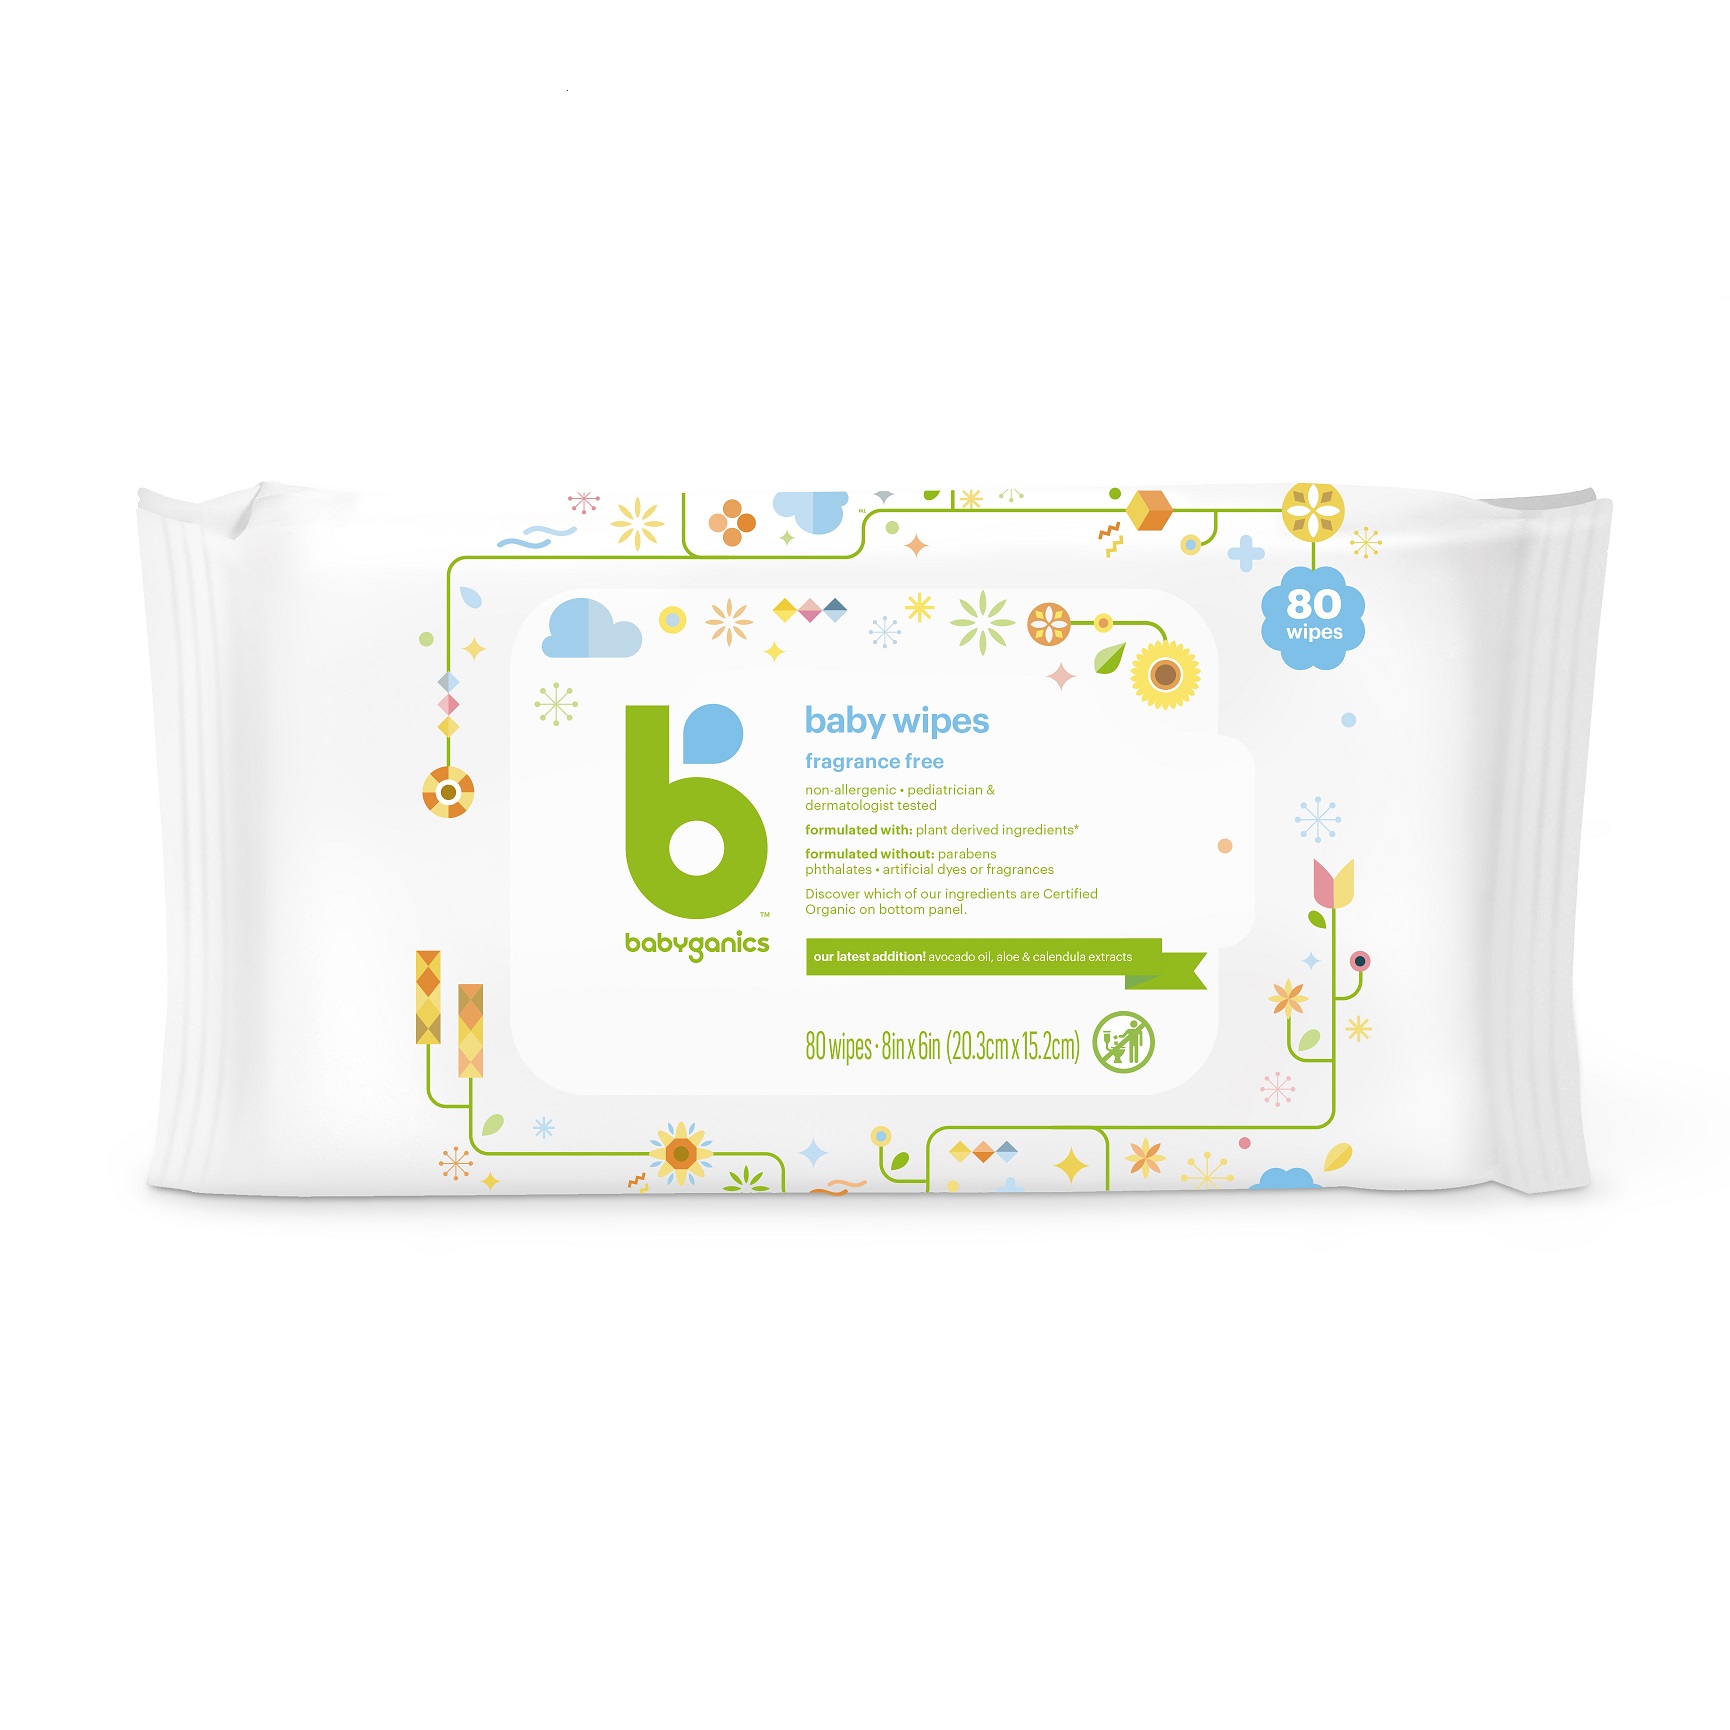 baby wipes, fragrance free